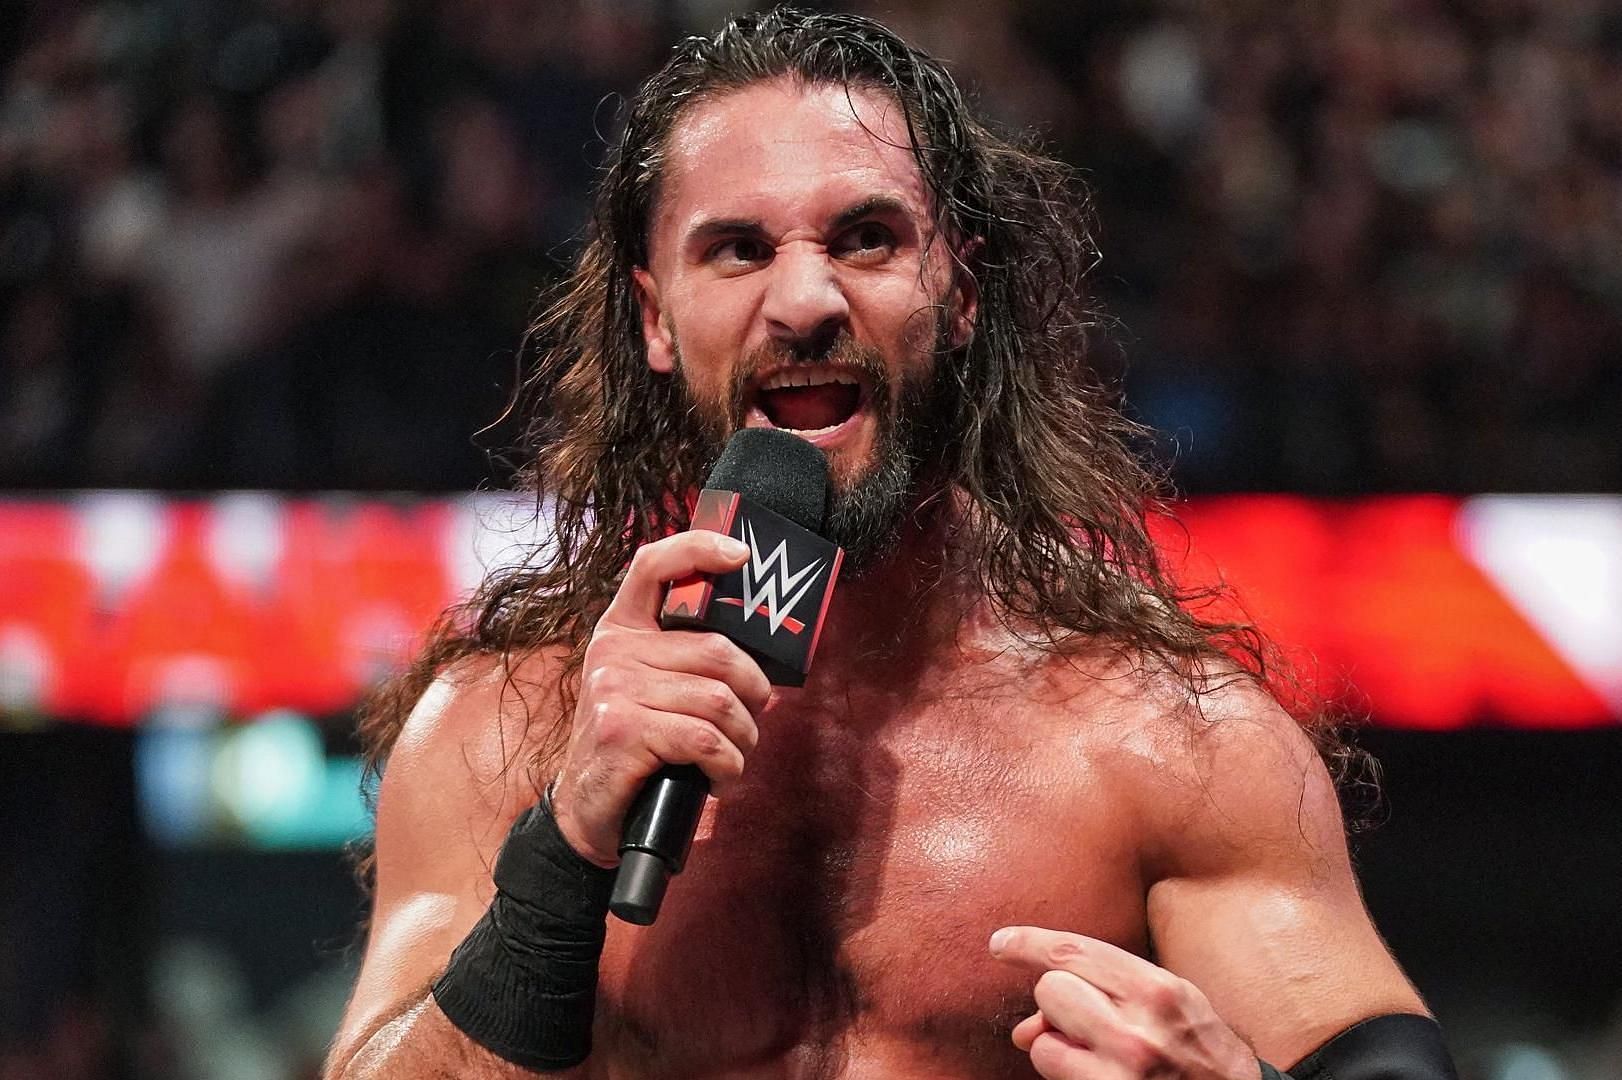 Seth Rollins is set to challenge for the WWE US Title on RAW